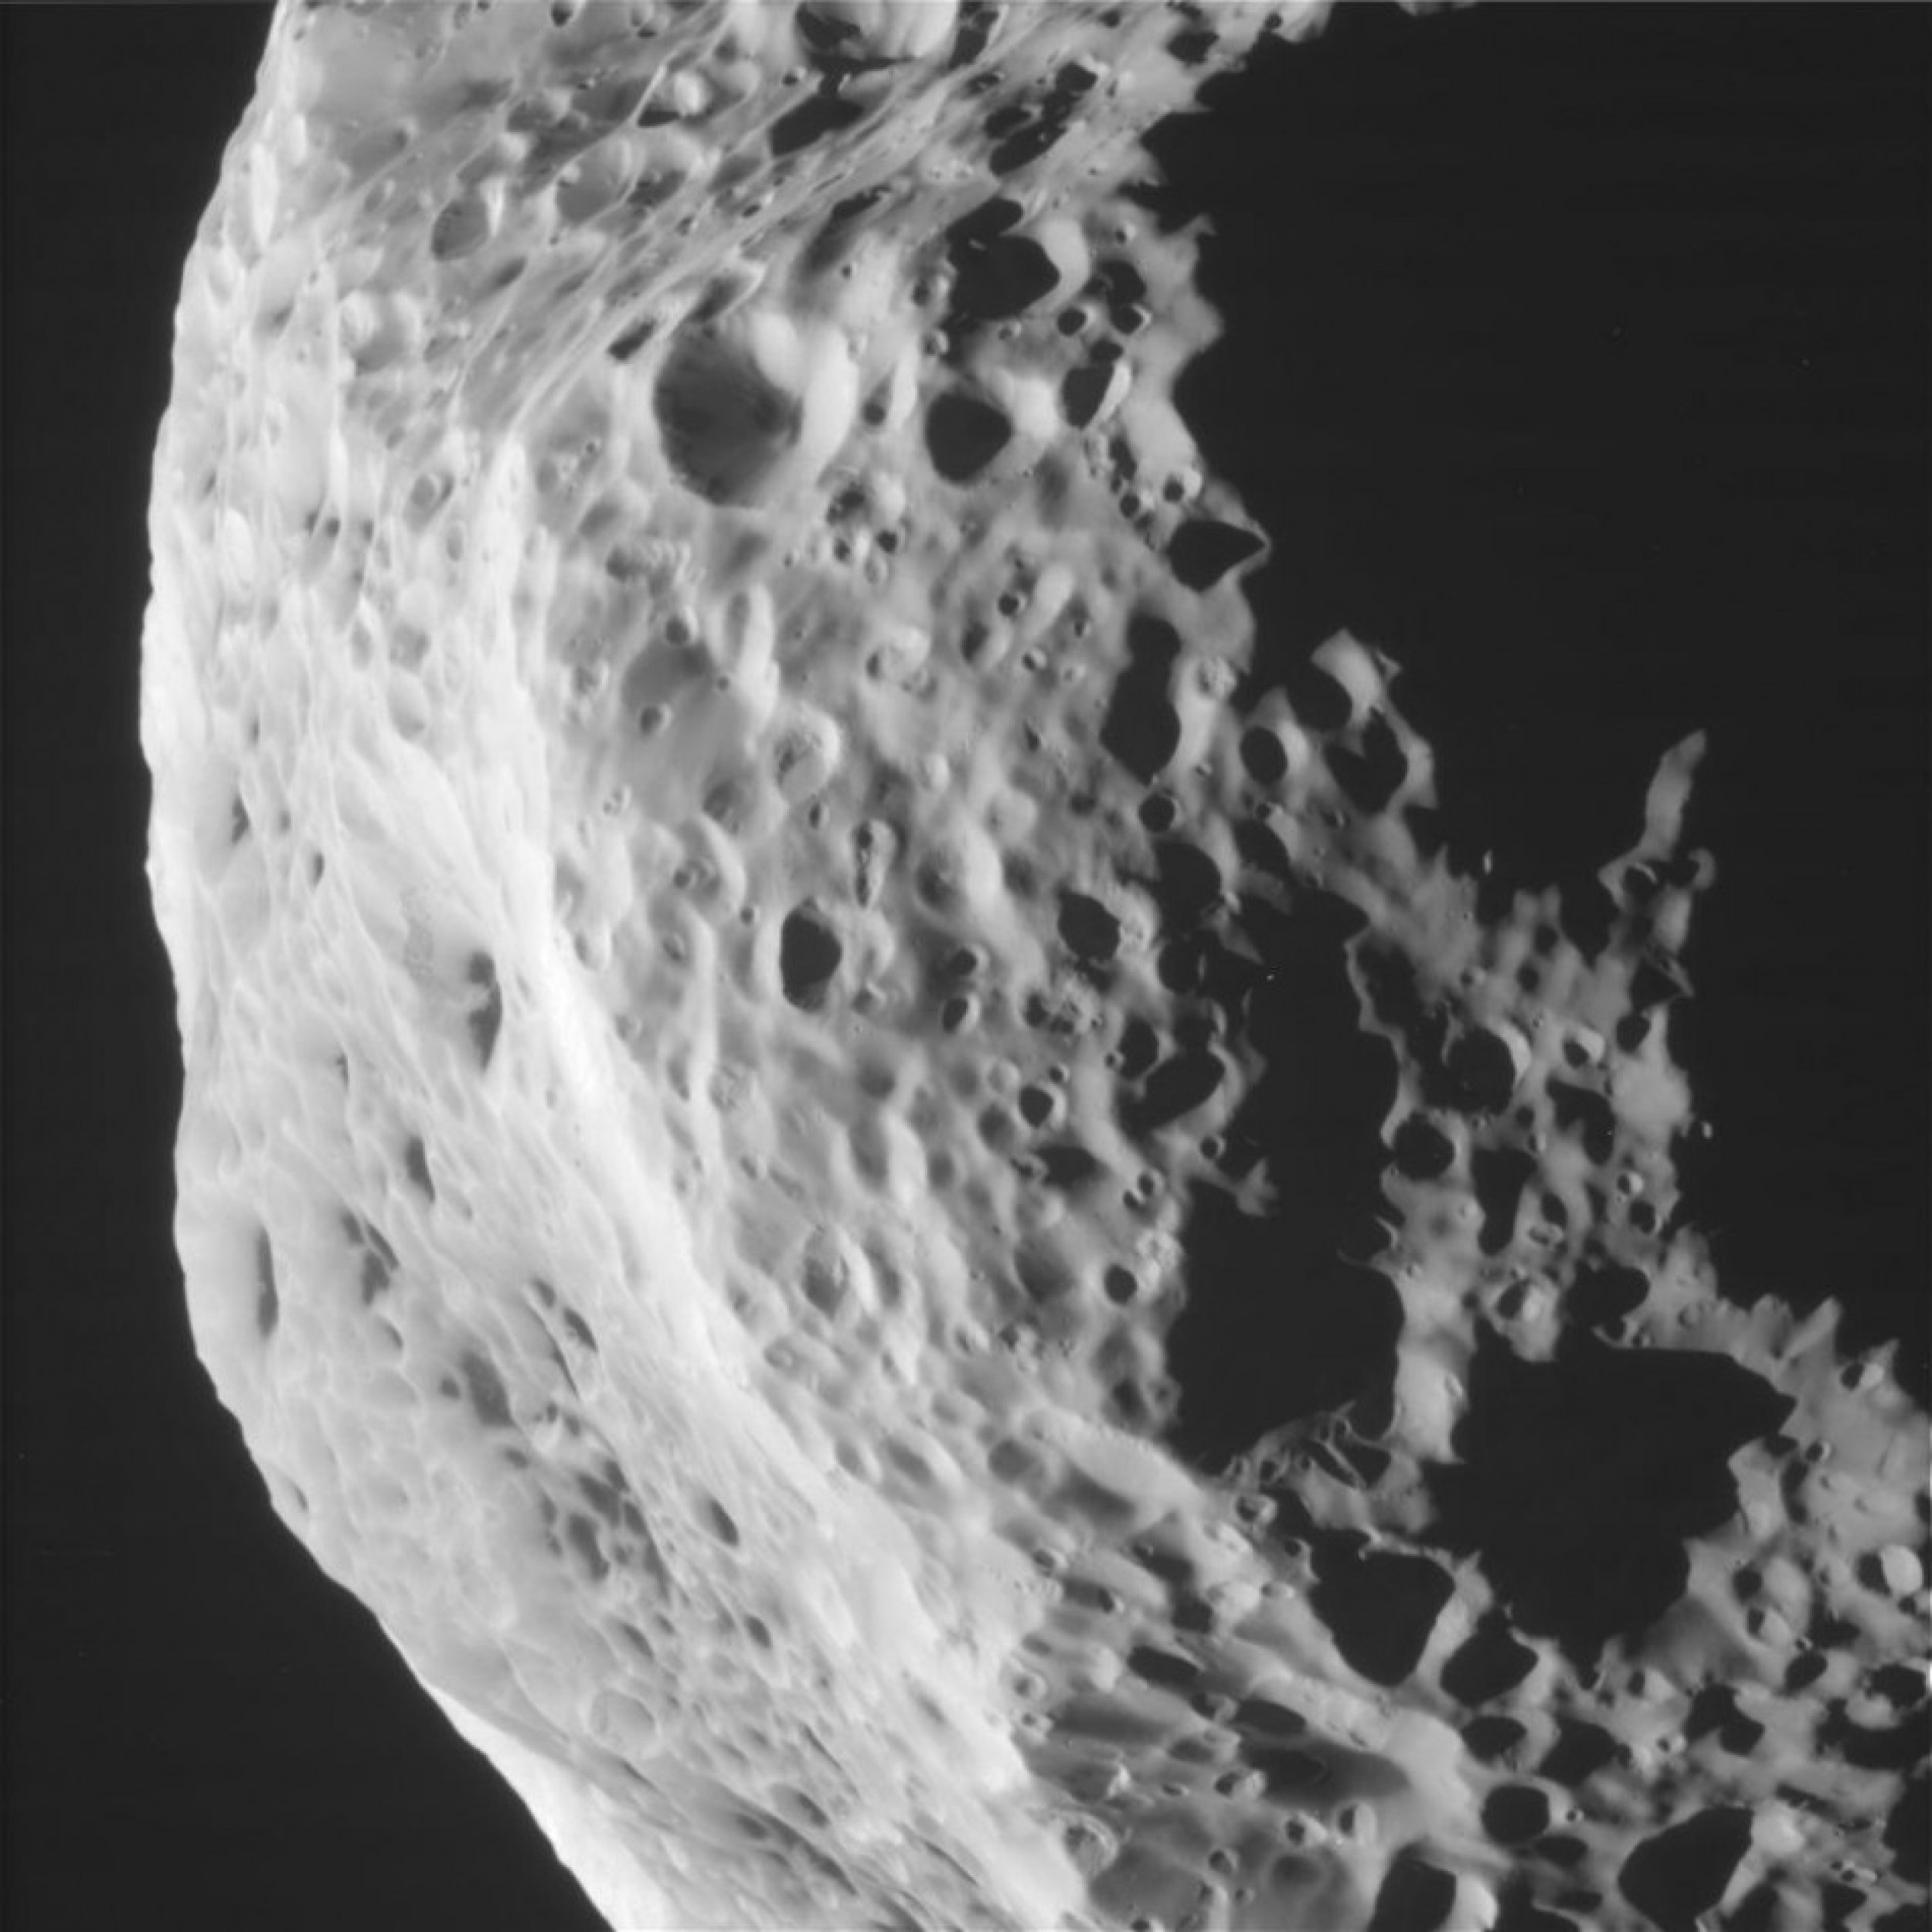 NASA Captures Spectacular Cosmic Images of Saturns Oddly Shaped Moon Hyperion.